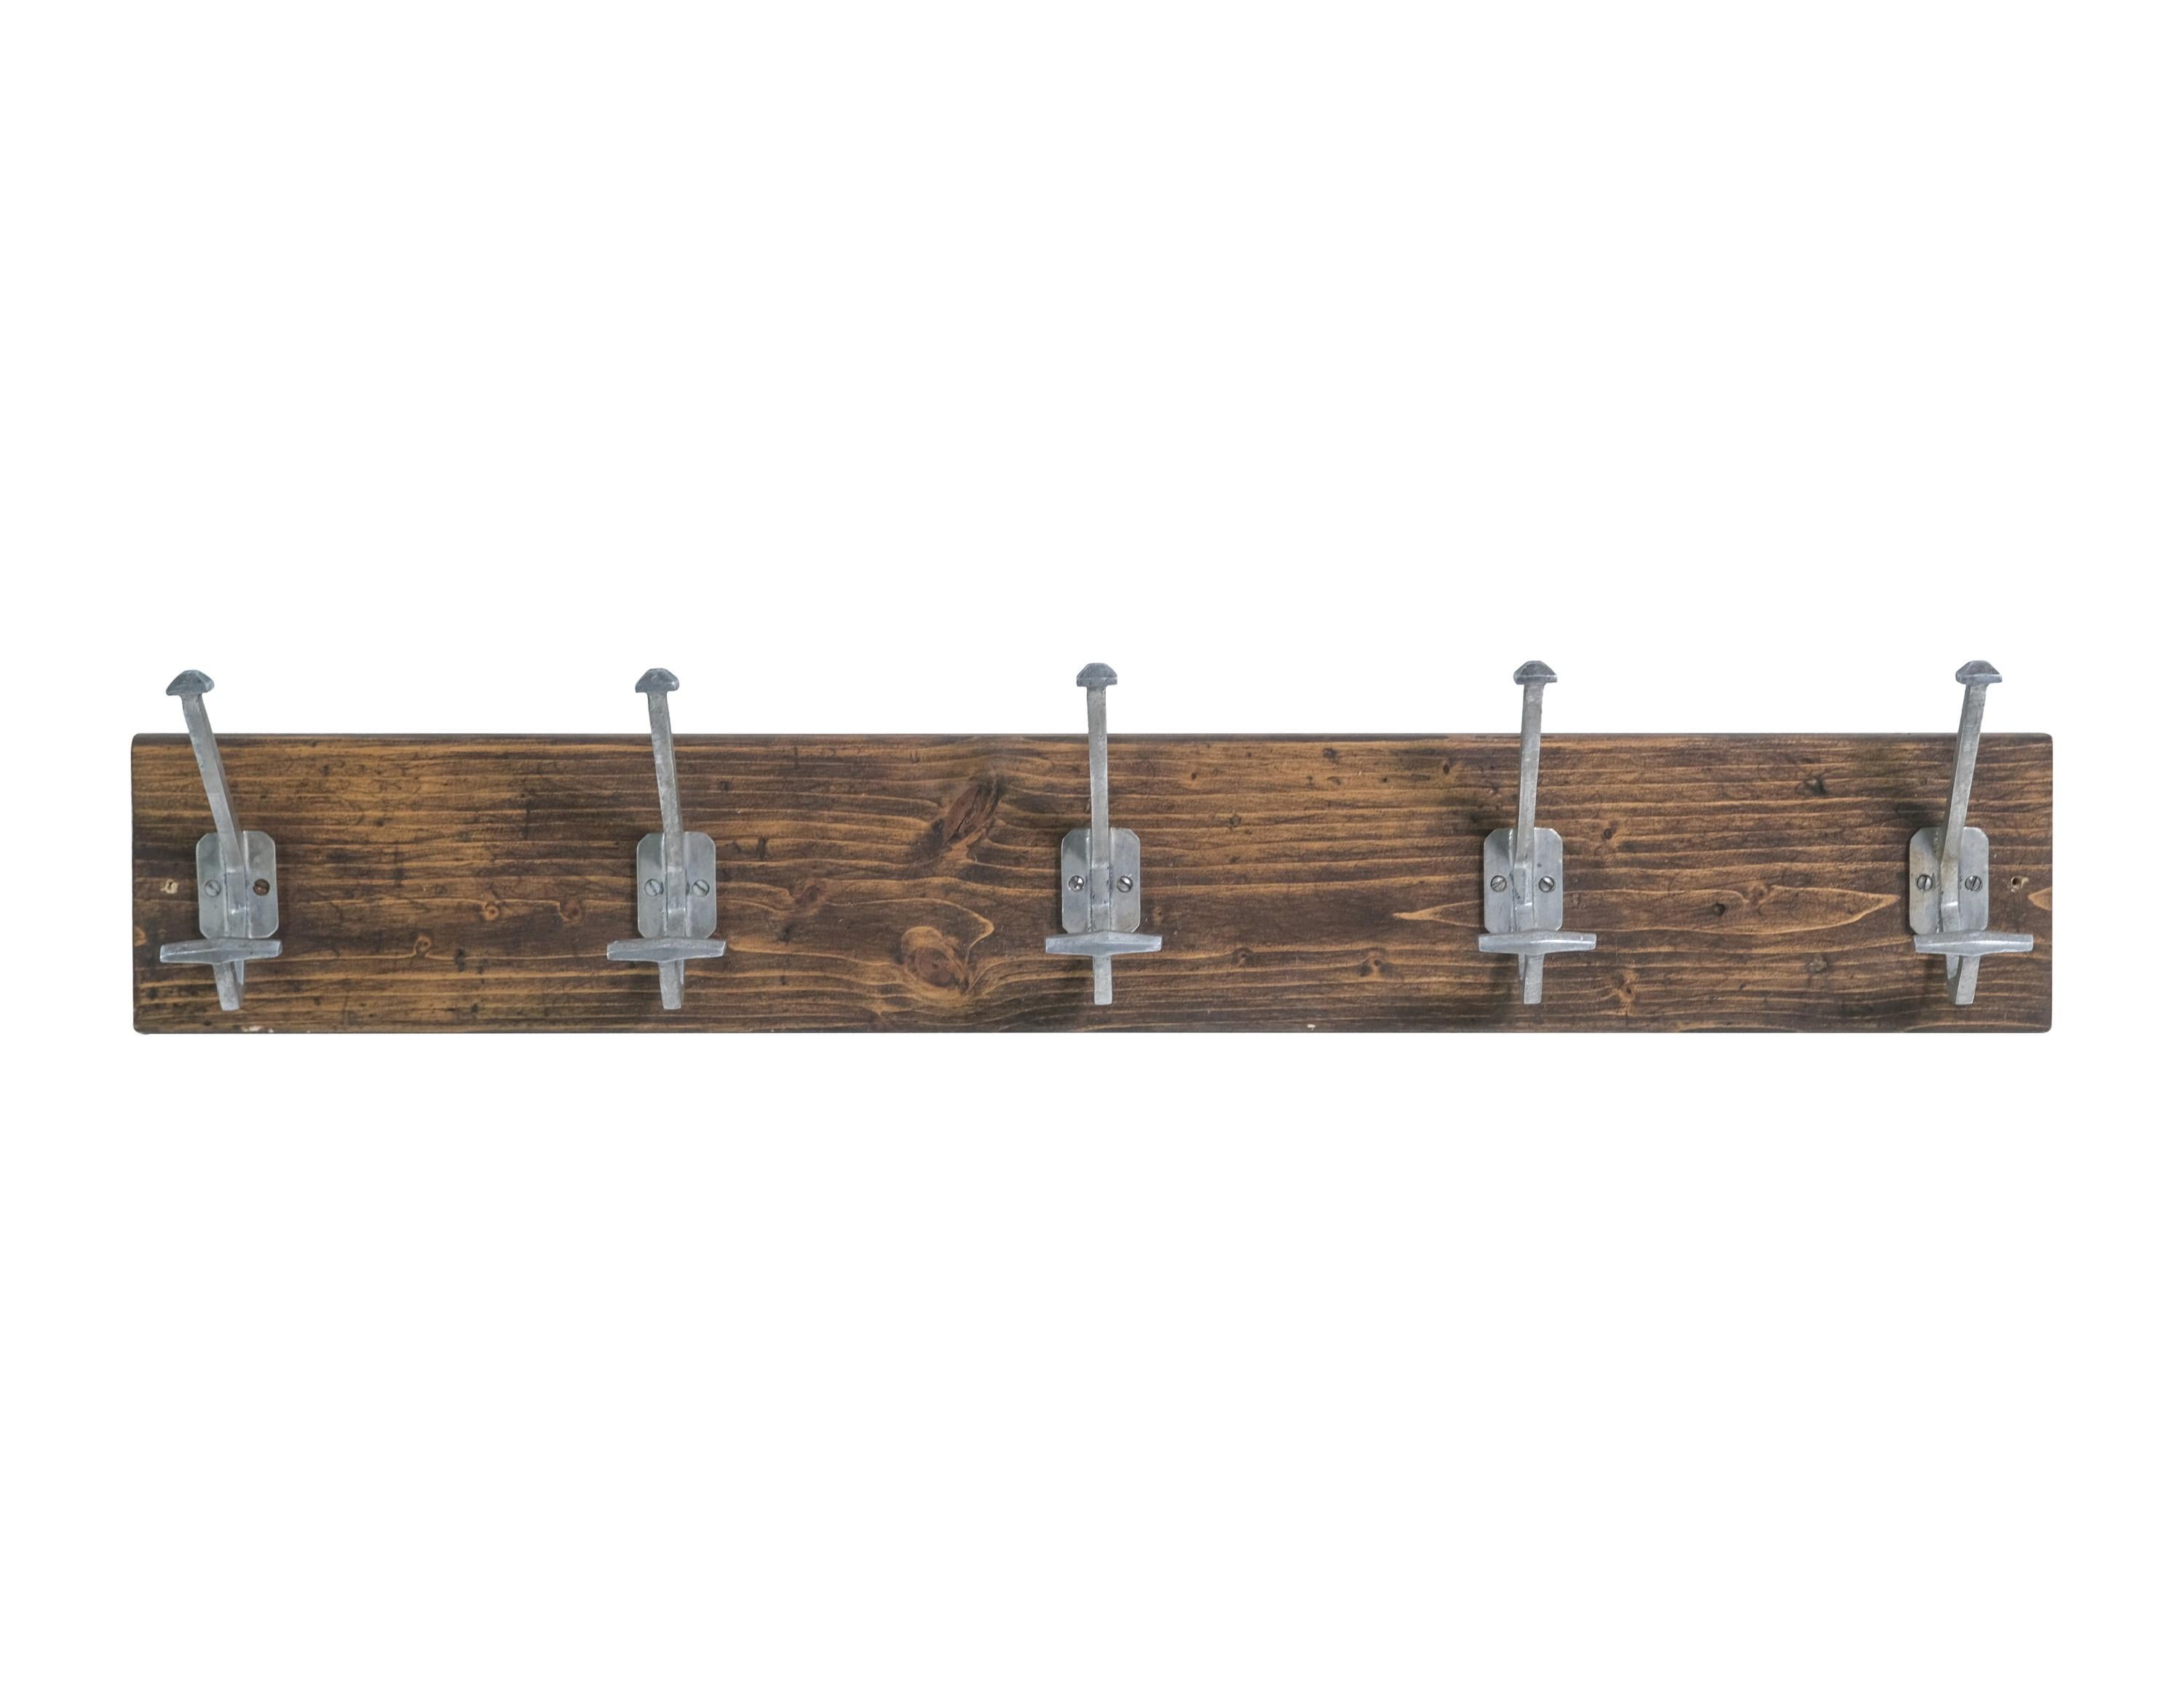 Coat and hat rack from Europe. This features five aluminum double hook hooks mounted to a piece of pine. Please note, this item is located in our Scranton, PA location.